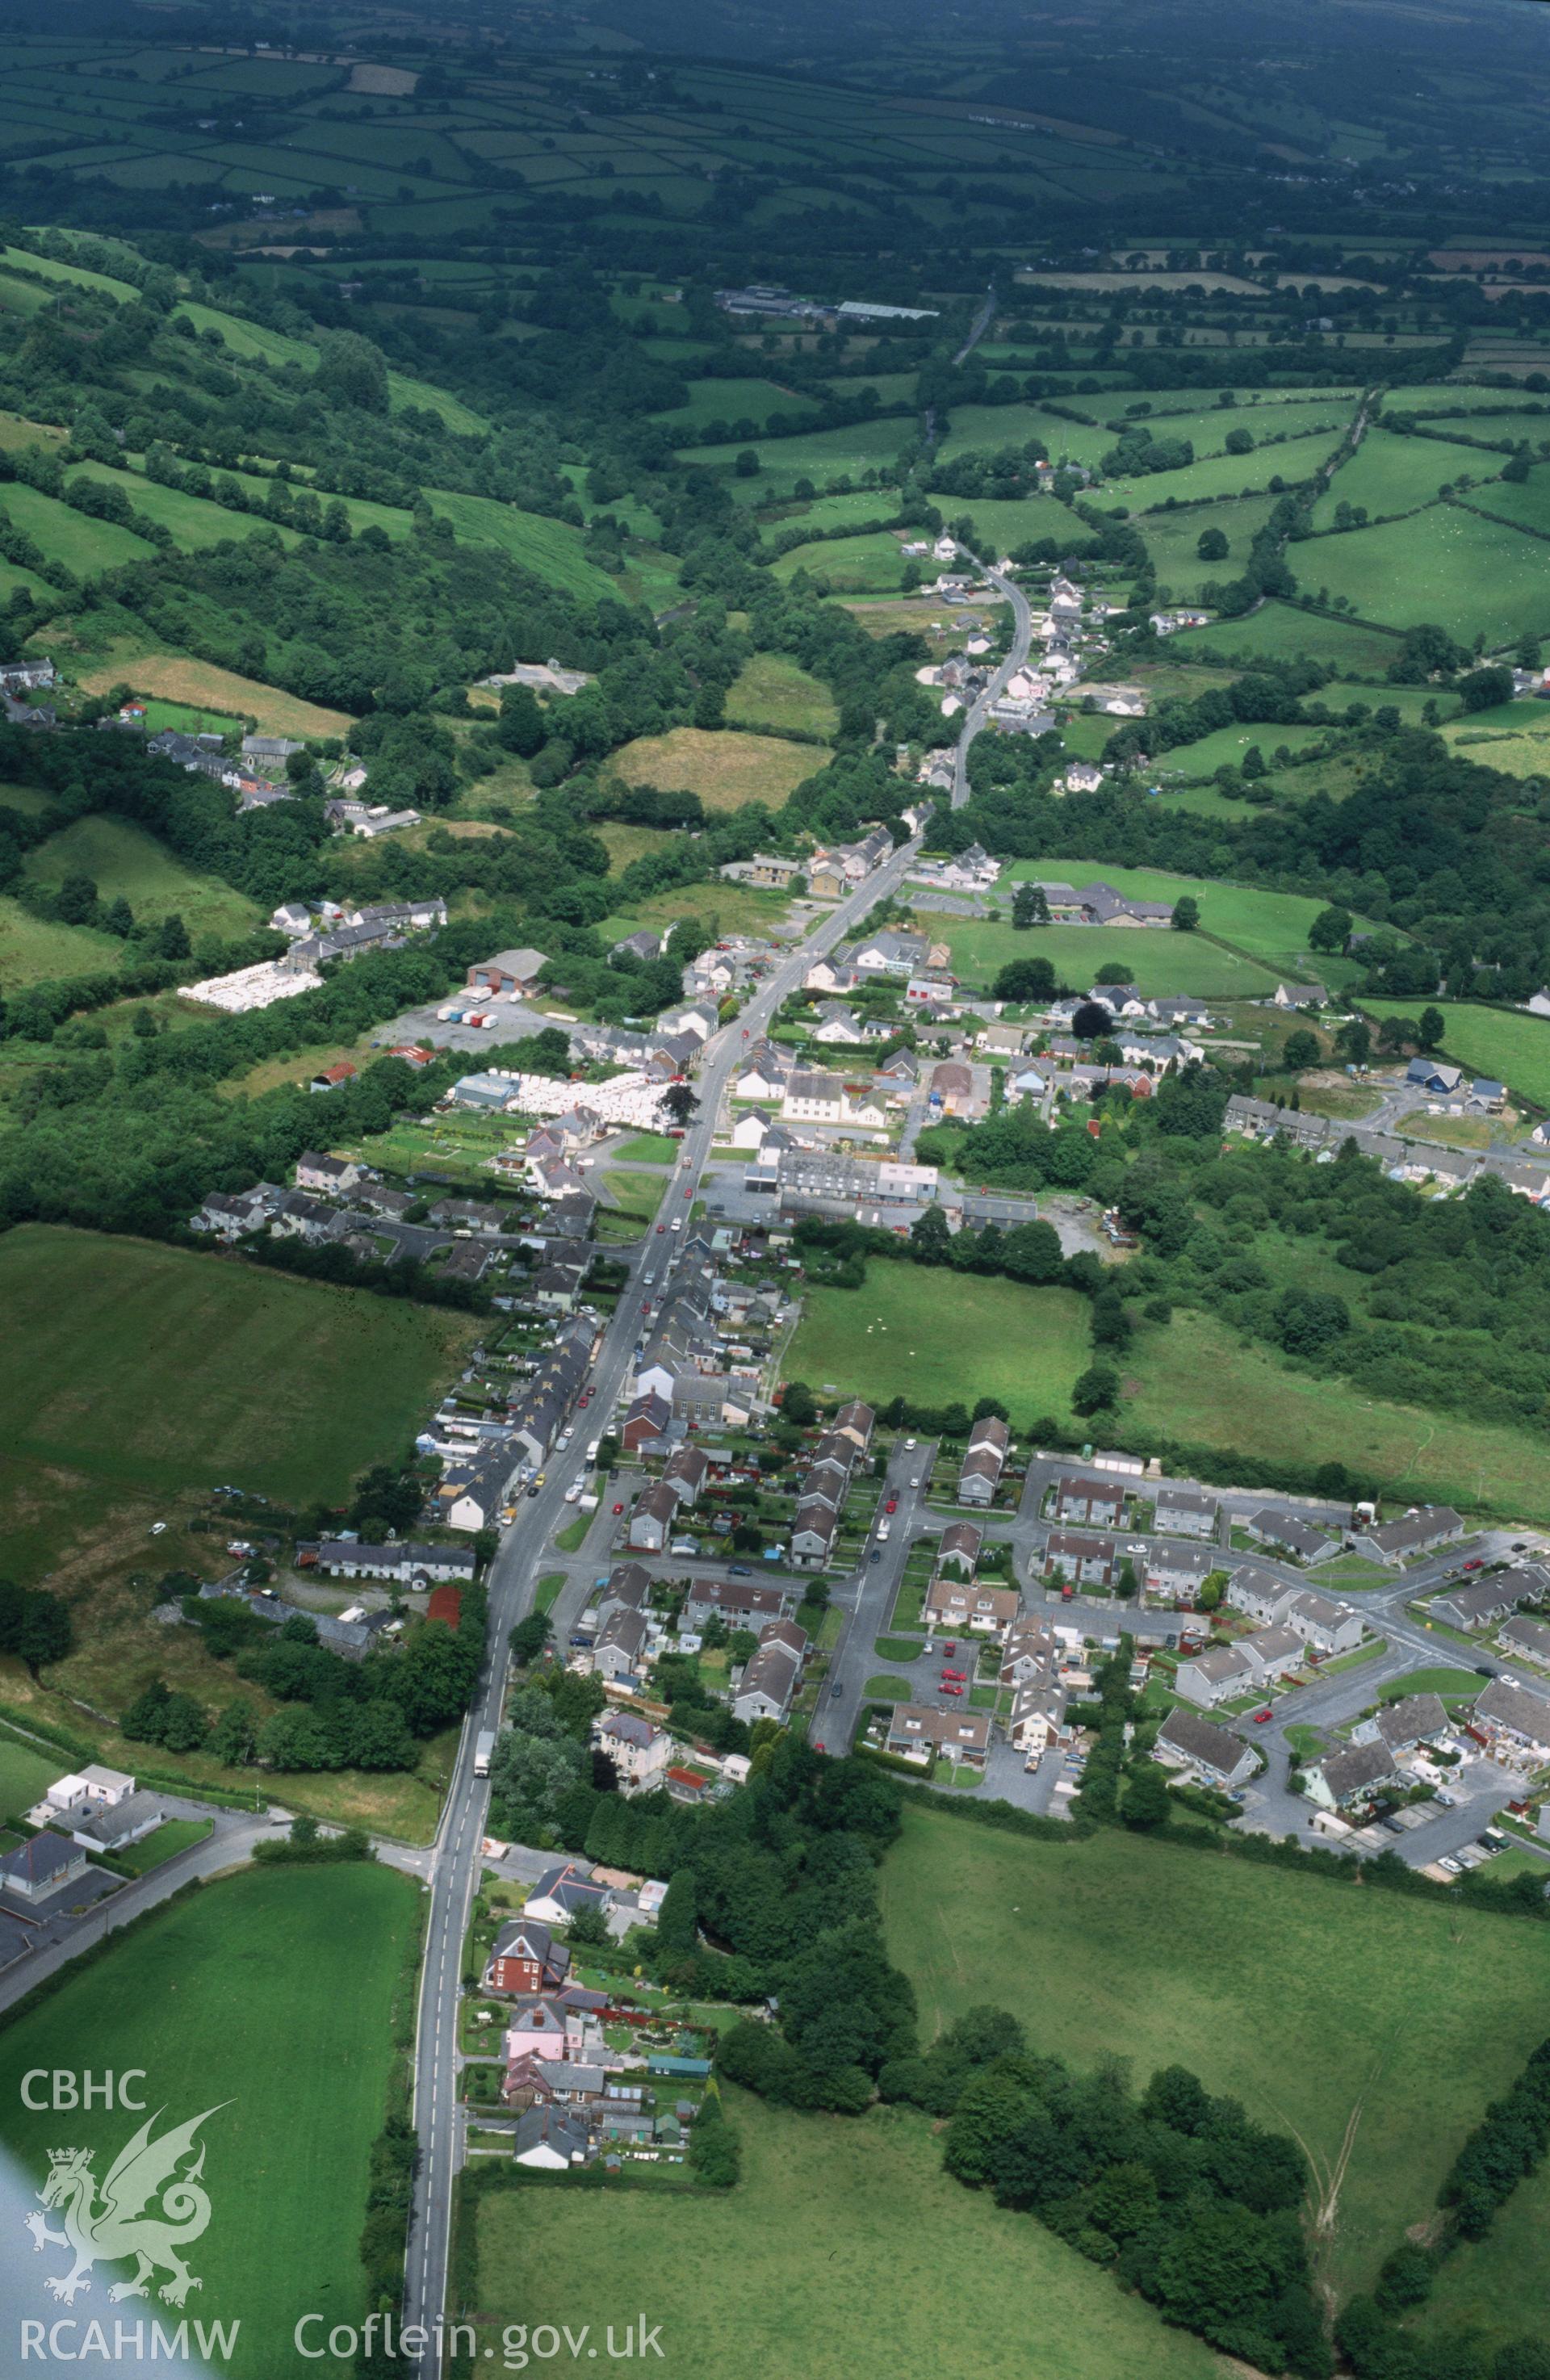 Slide of RCAHMW colour oblique aerial photograph of Pencader, taken by T.G. Driver, 19/7/2001.